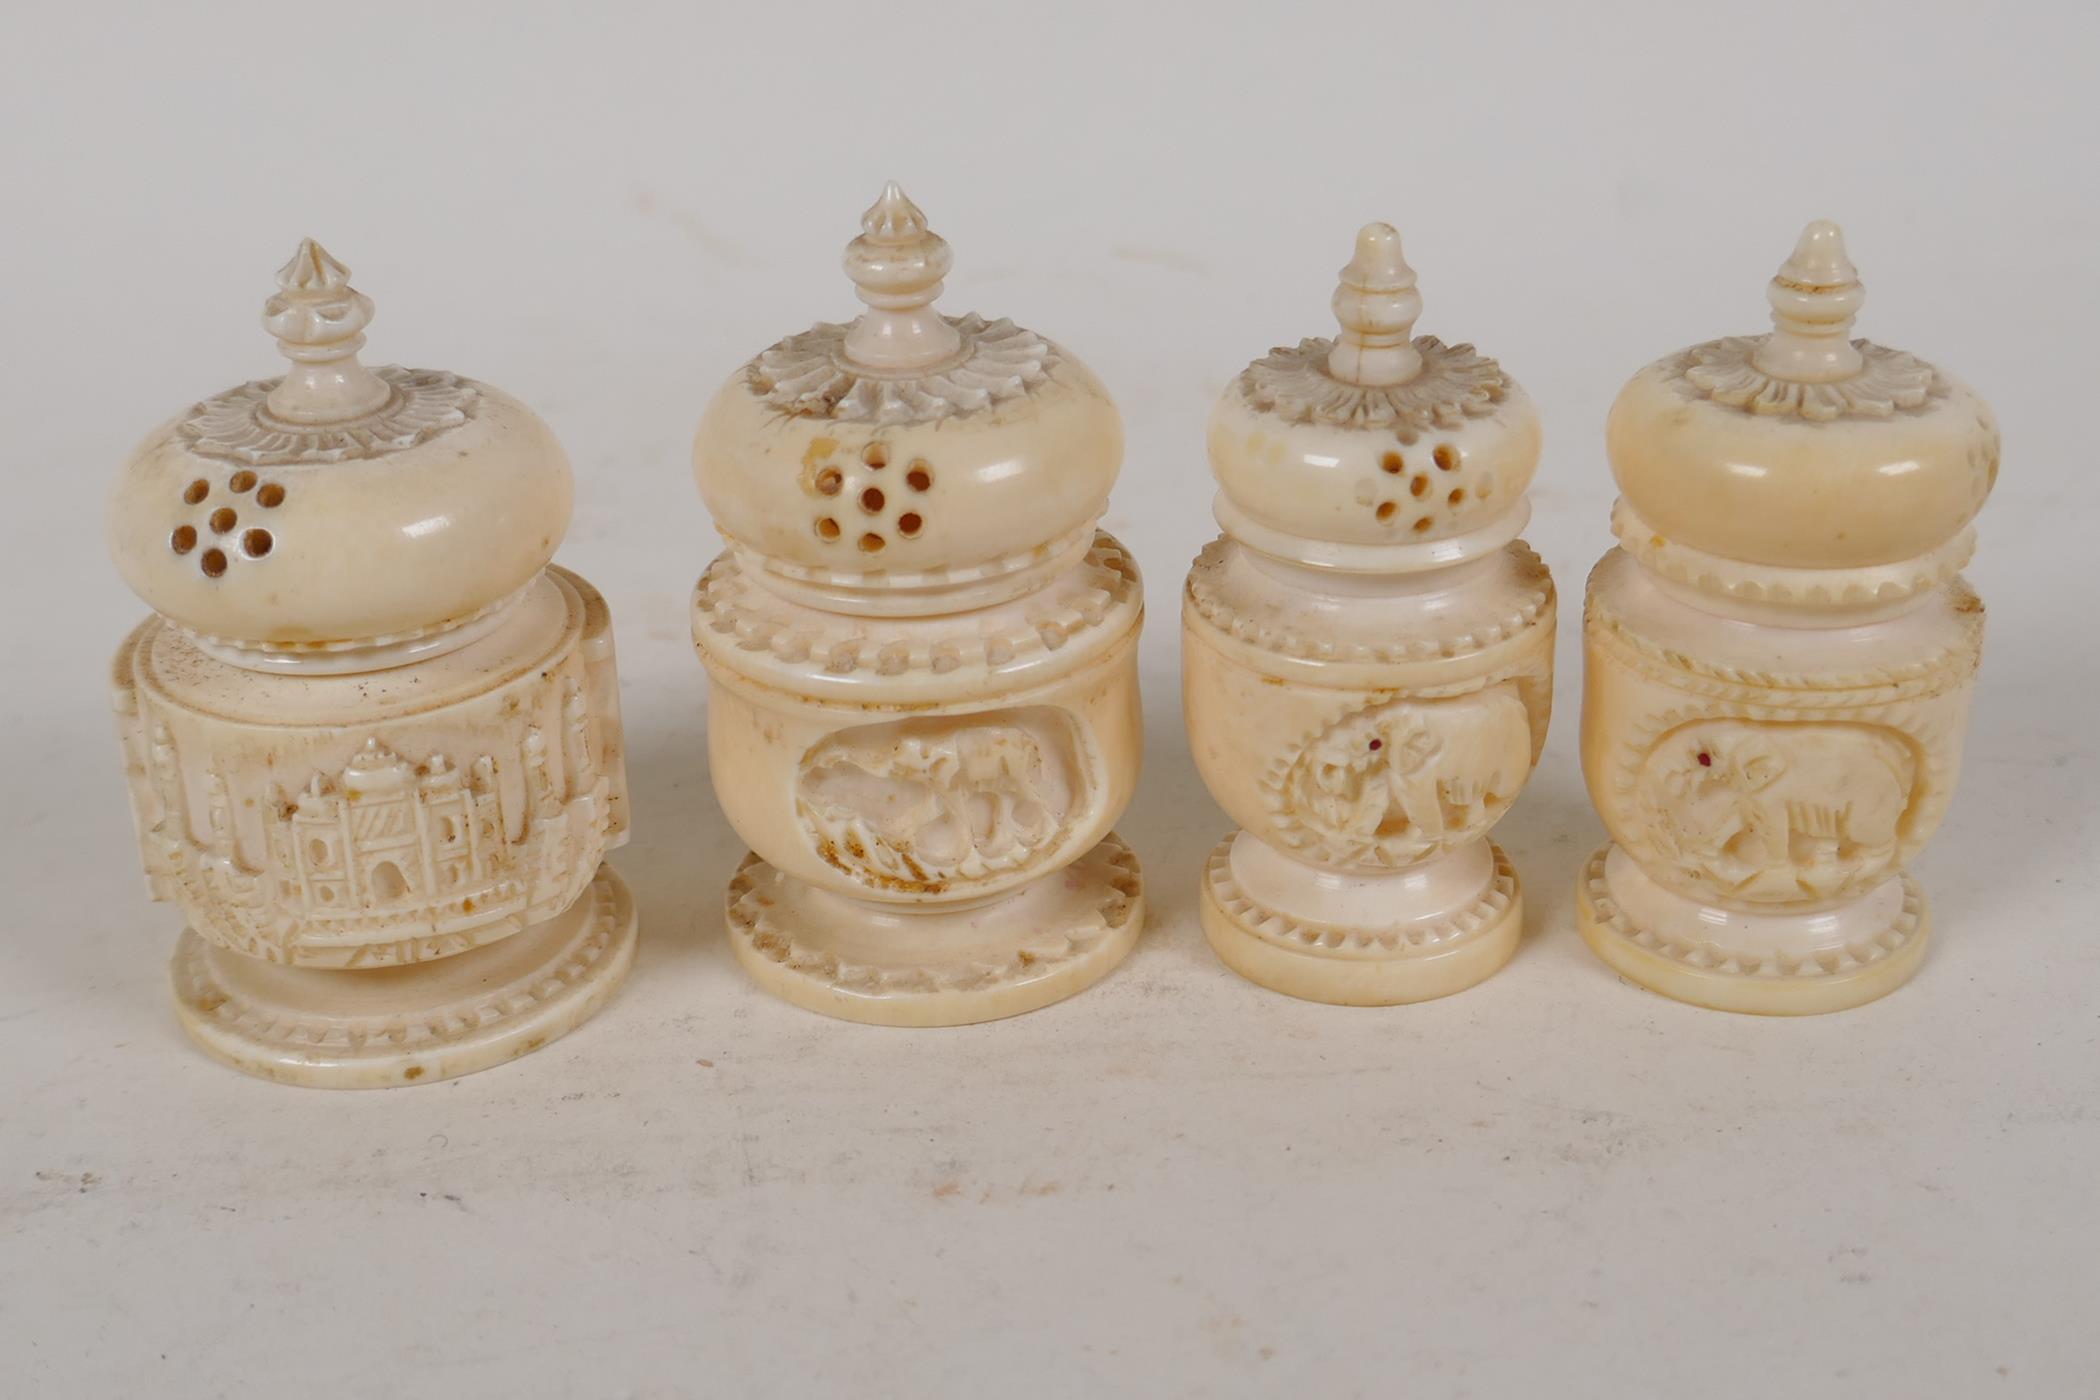 An Indian ivory cruet carved as temple towers, 2" high, and a similar smaller cruet